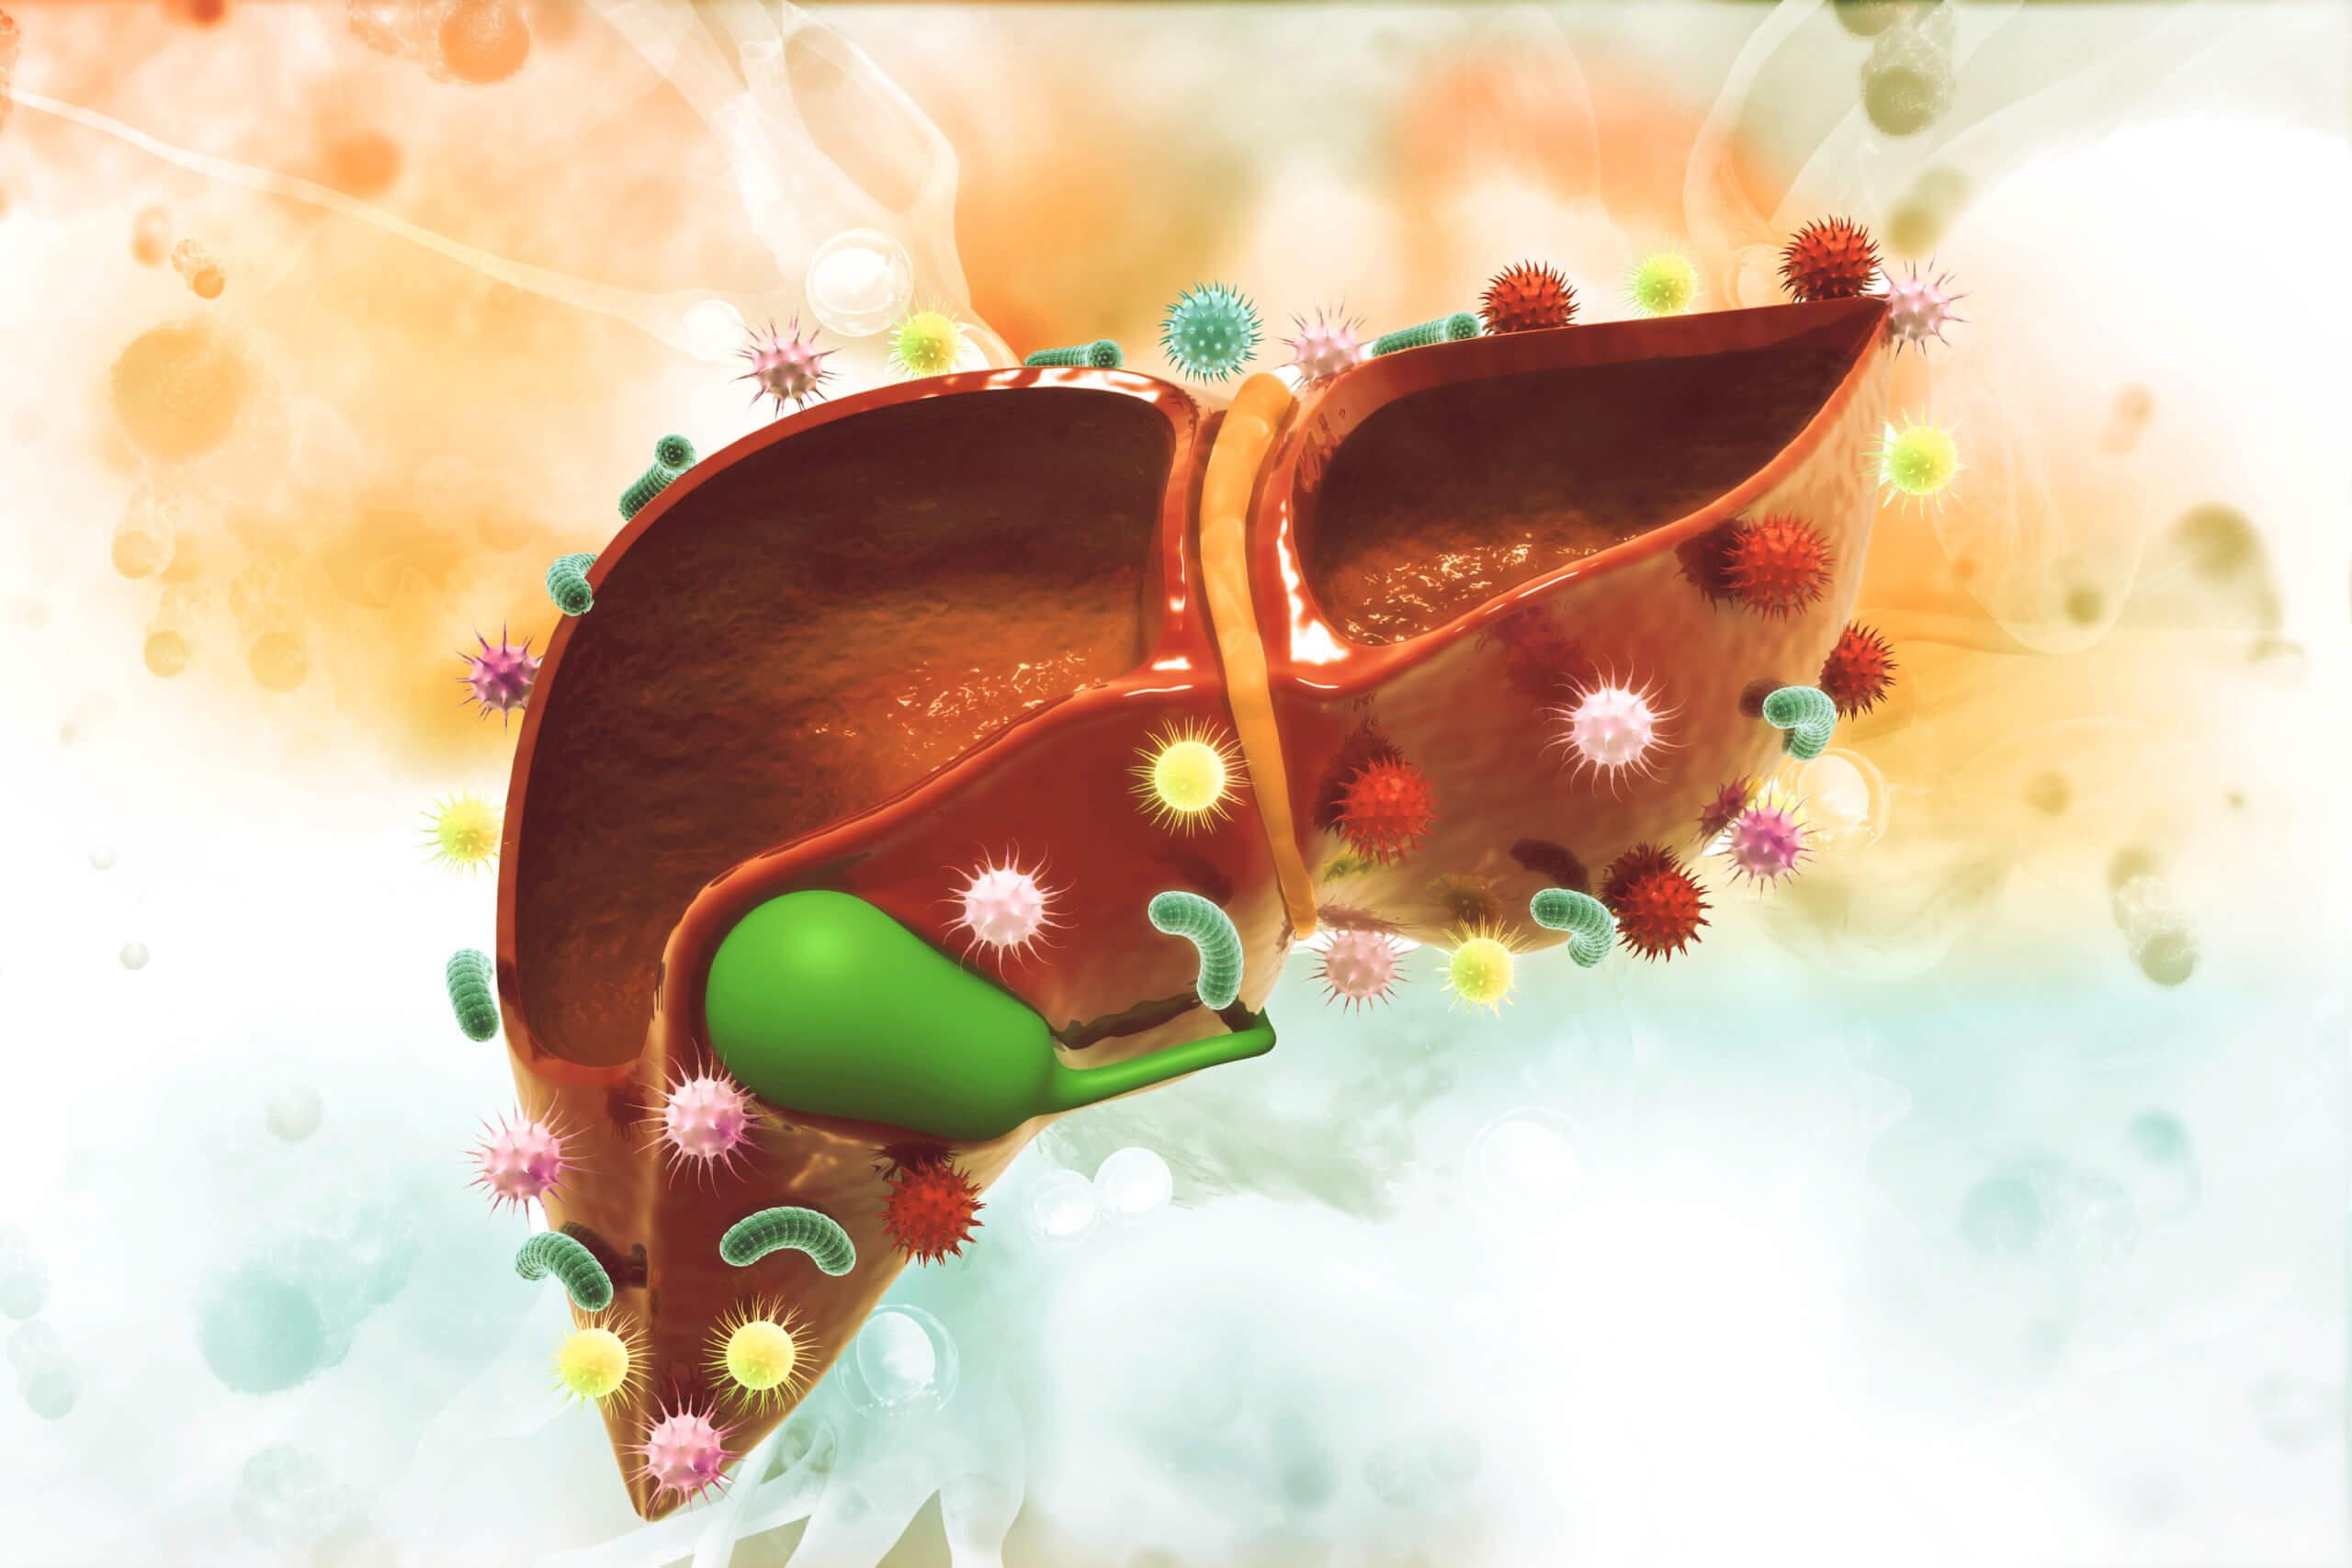 Virus and bacteria on liver